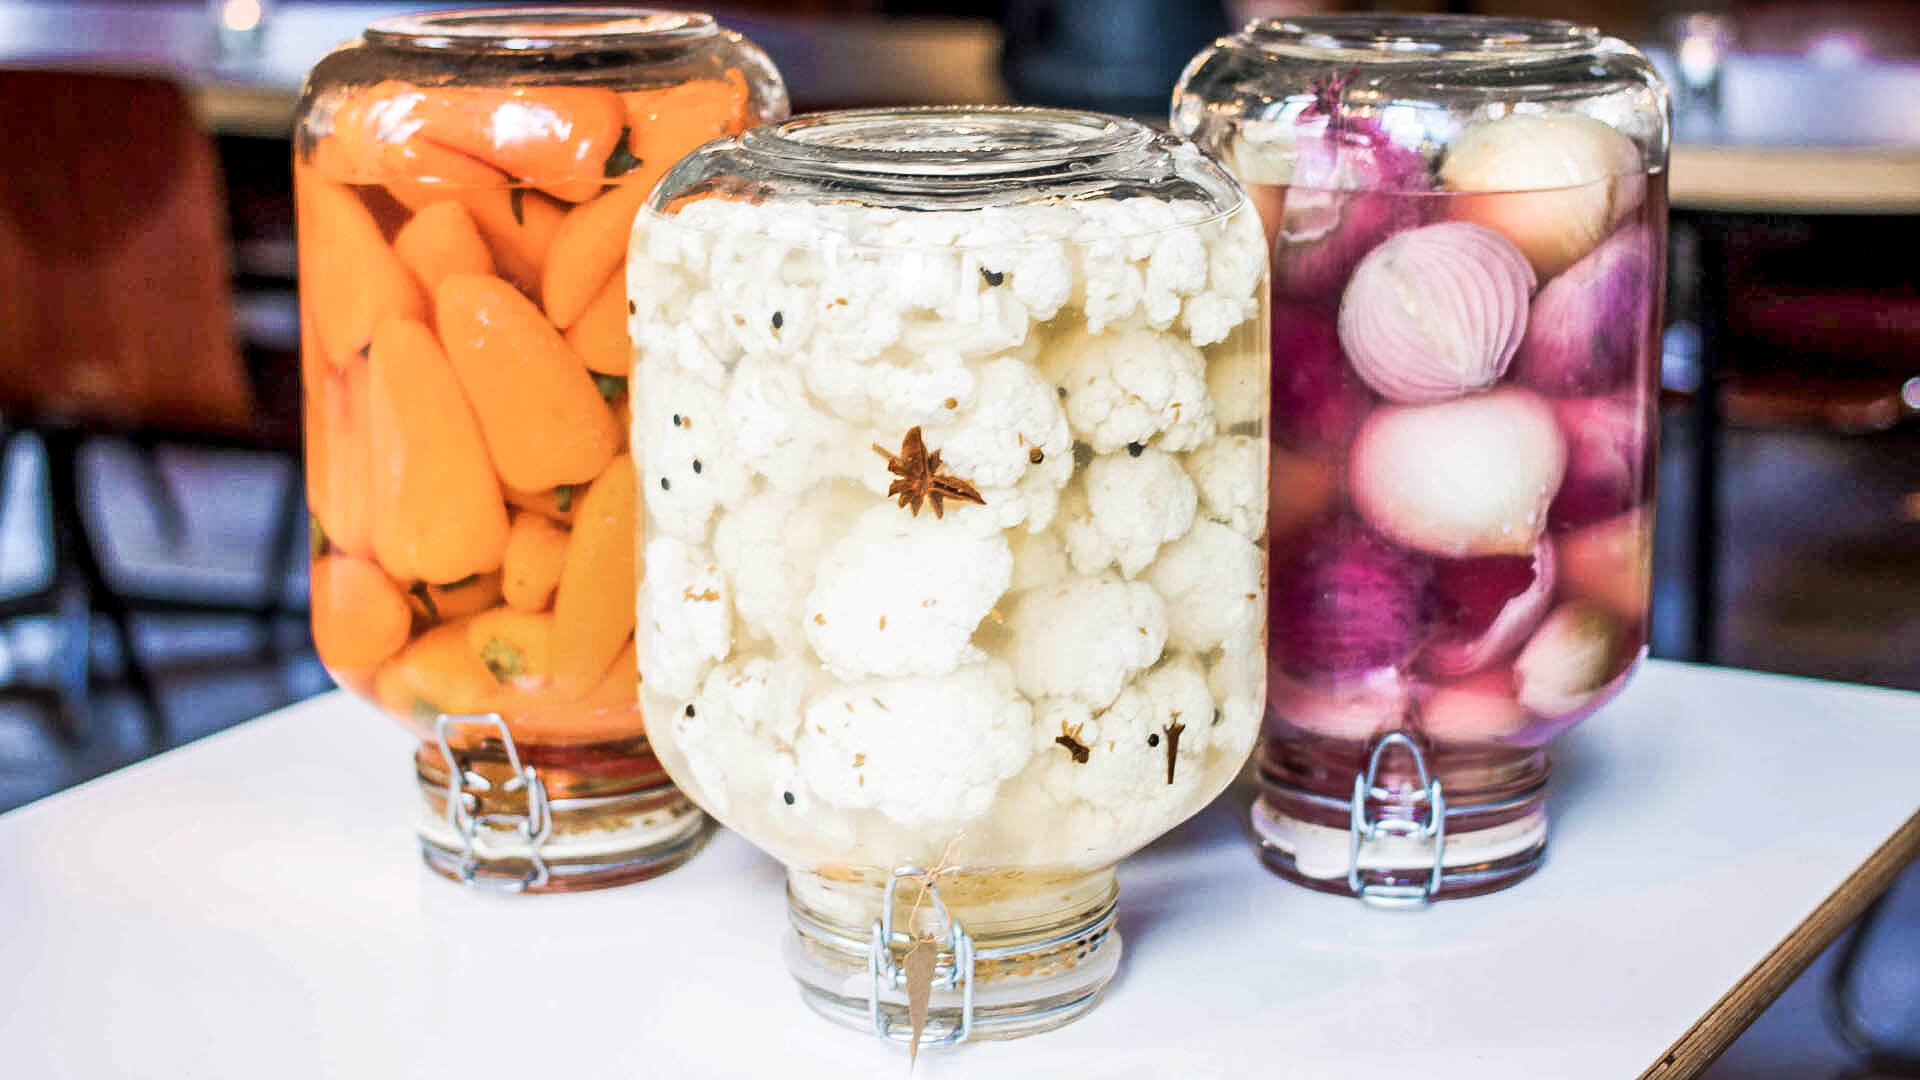 Preserving raw materials over time like with fermentation reduces food waste